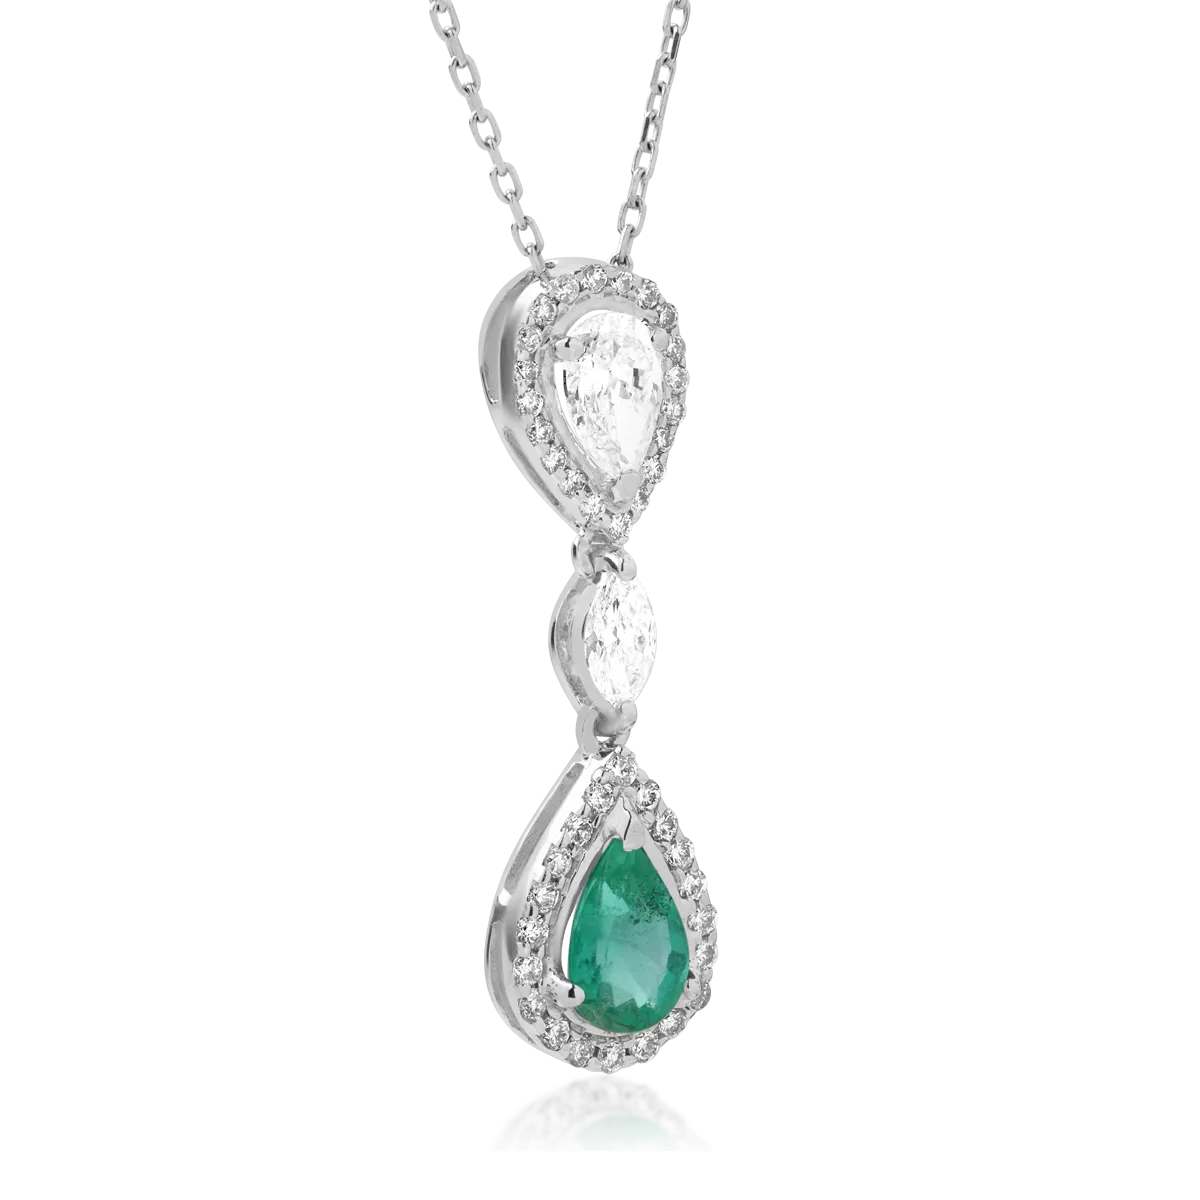 18K white gold pendant necklace with 0.6ct emerald and 0.84ct diamonds